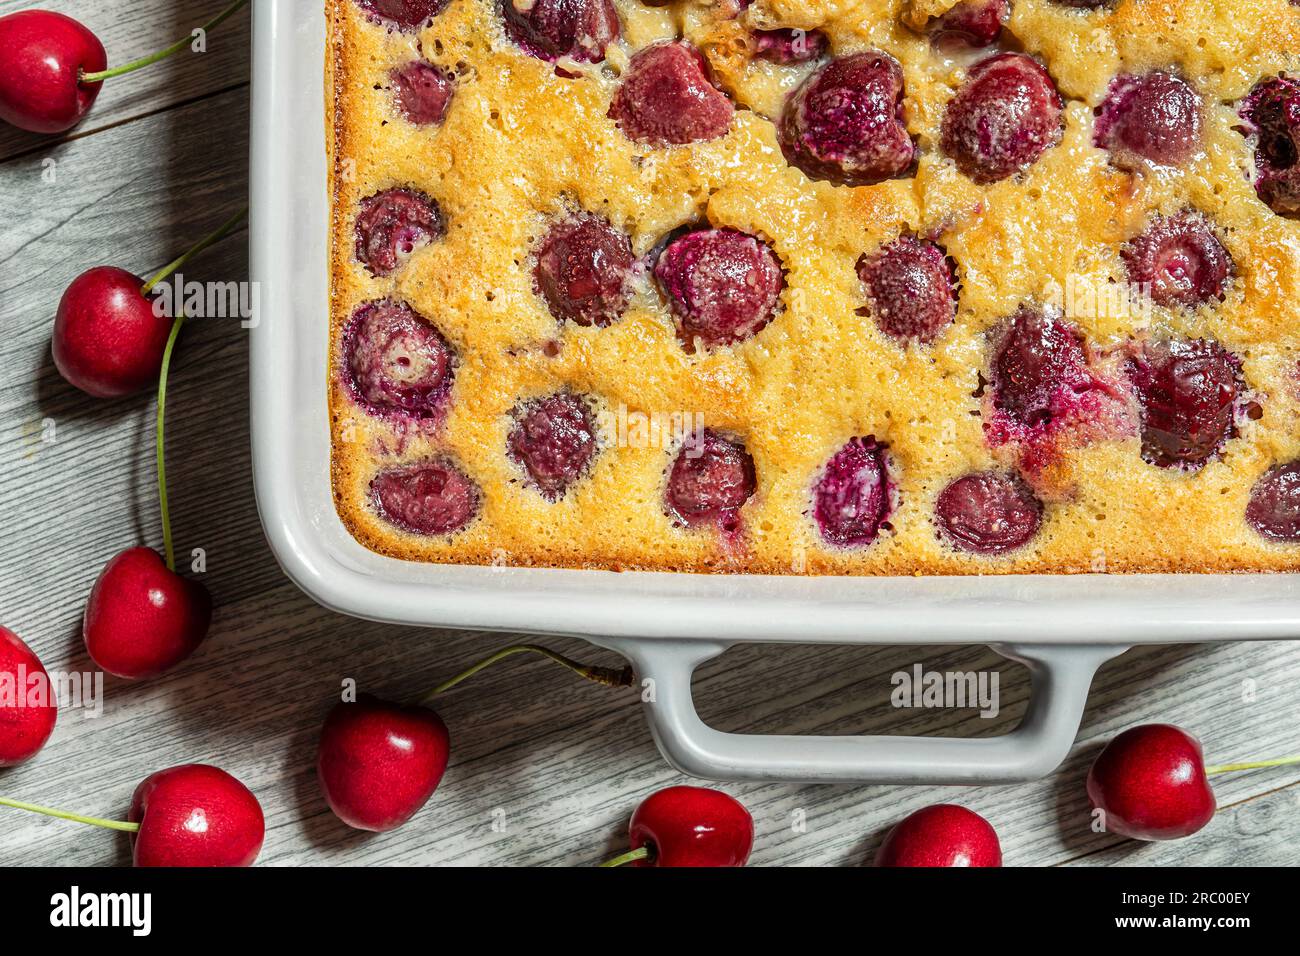 Clafoutis cherry tart - traditional french pie in a baking dish, top view Stock Photo